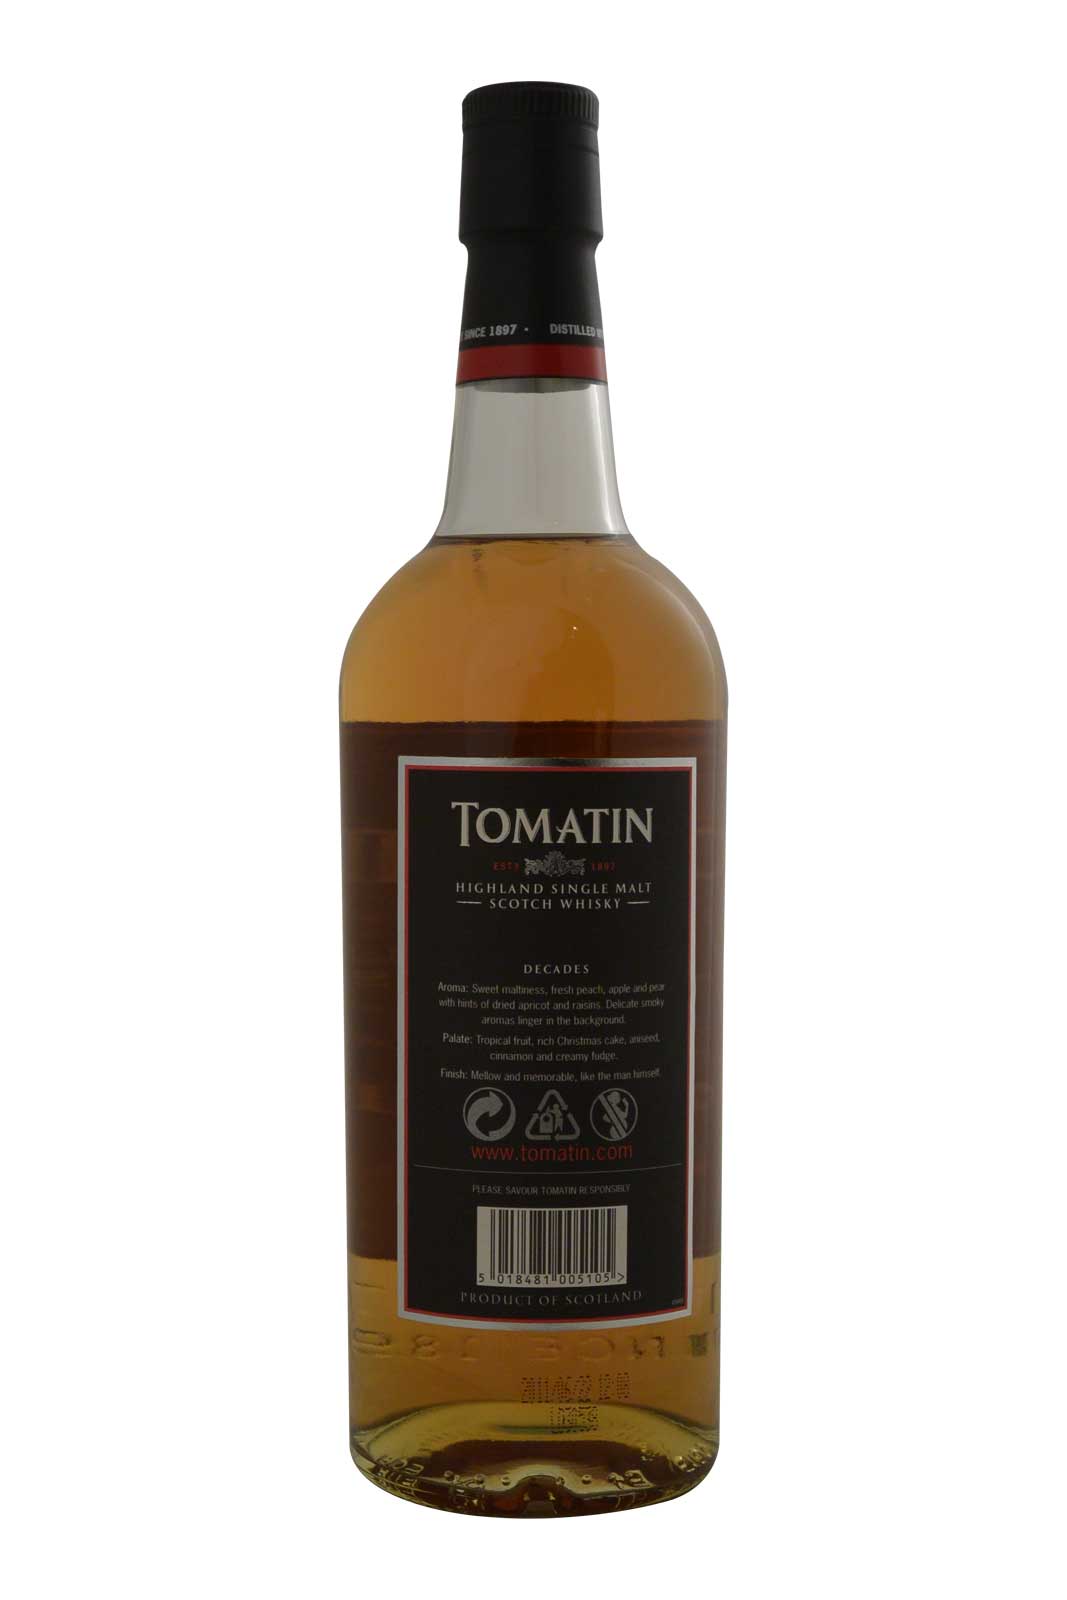 Tomatin Decades - First edition